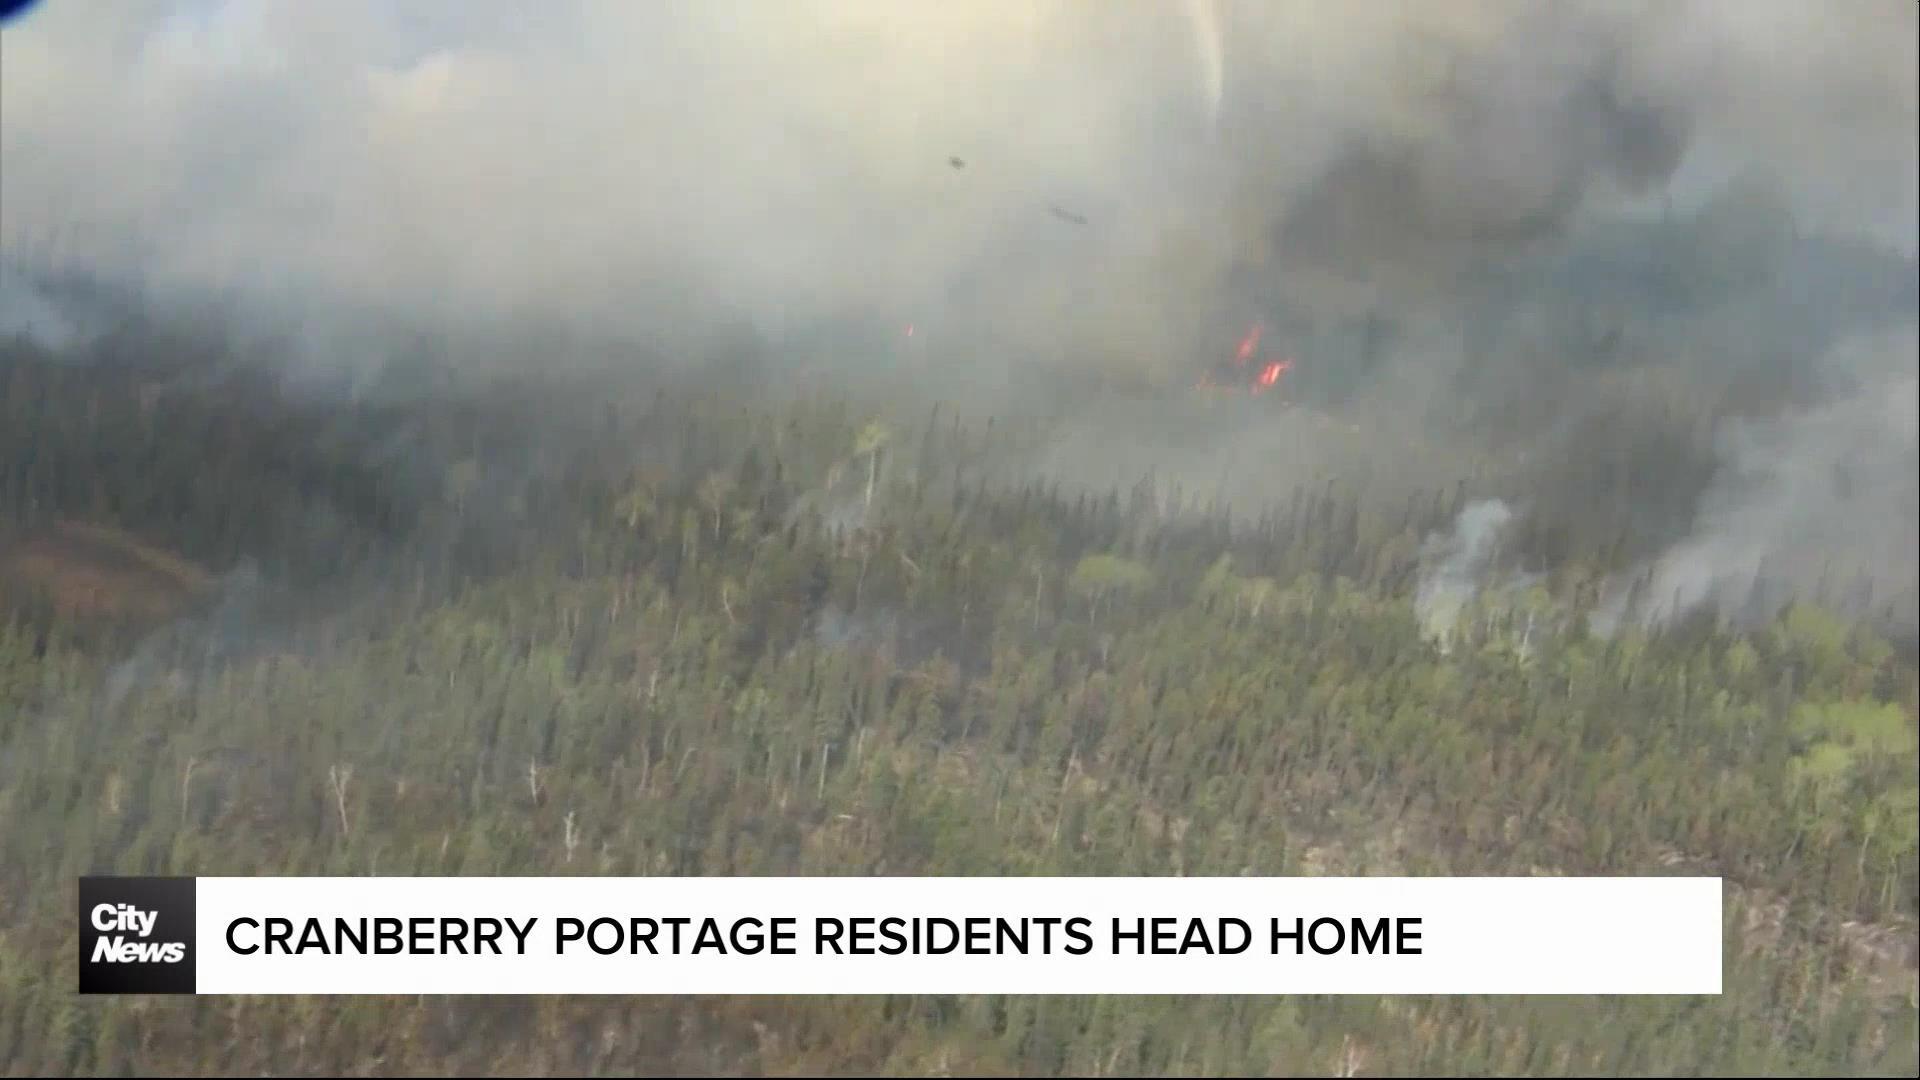 Cranberry Portage residents head home after massive wildfire